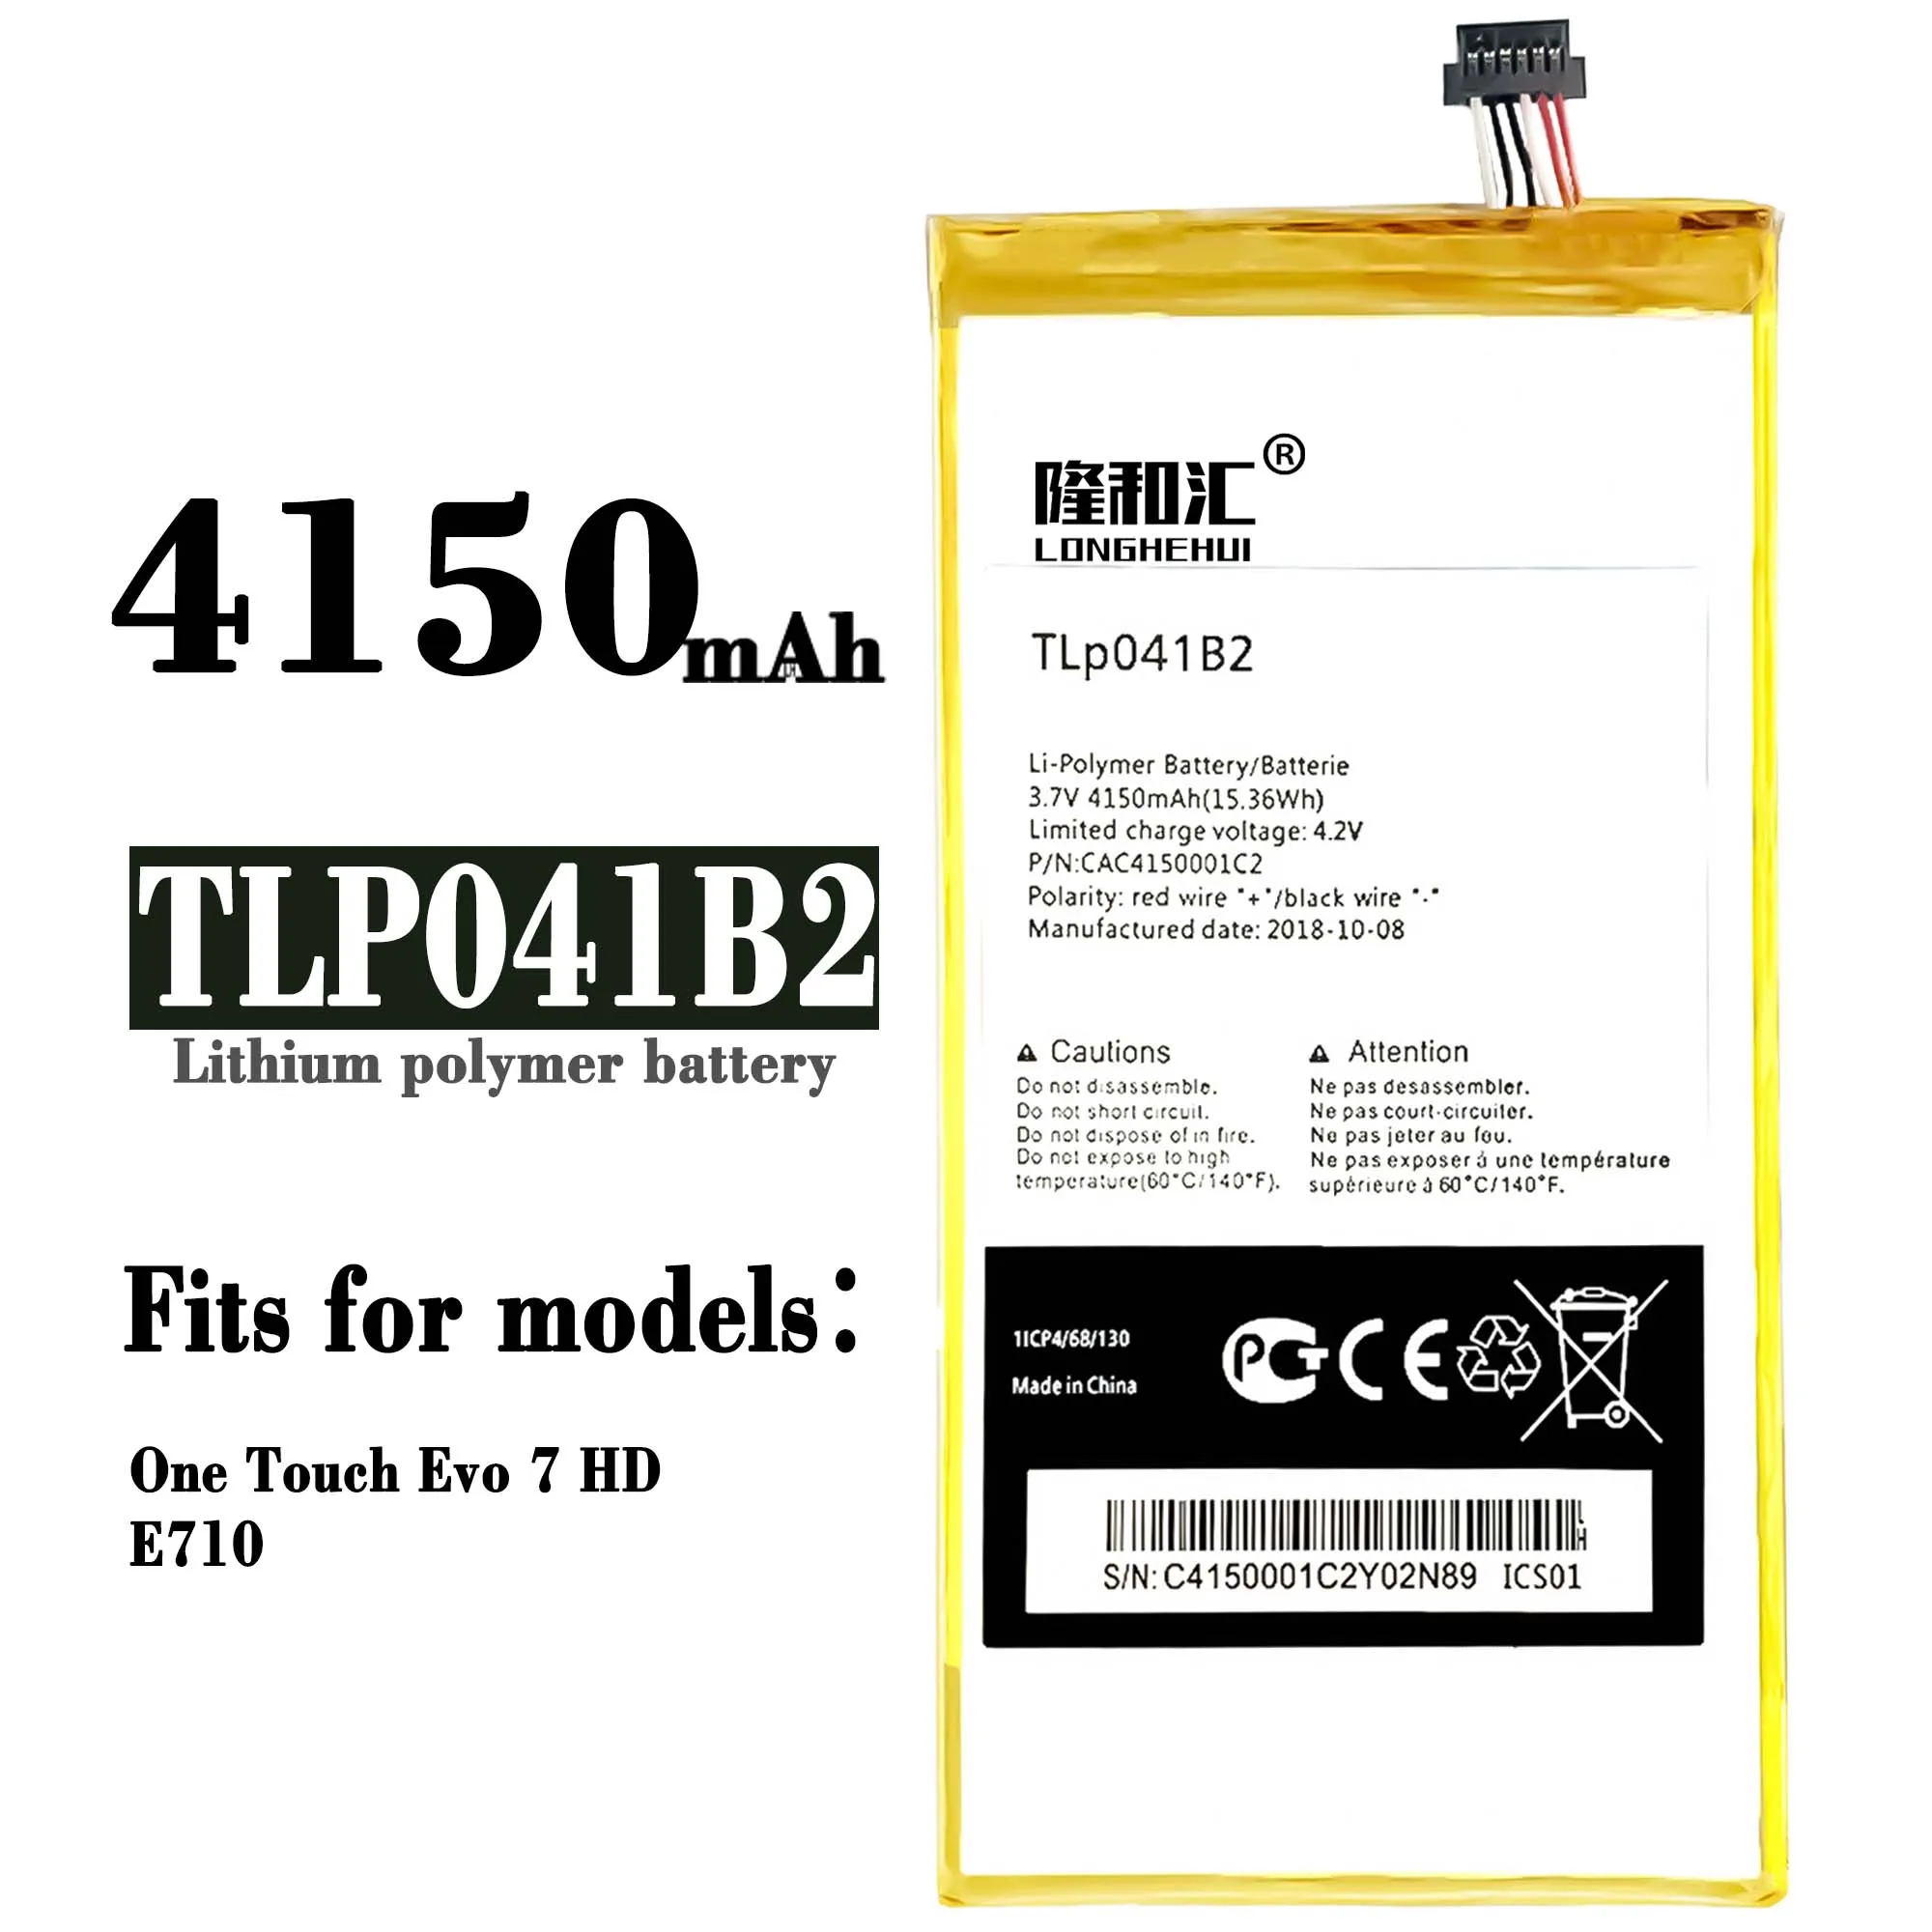 OEM TLP041B2 One Touch Evo 7 HD Mobile phone battery for Alcatel E710